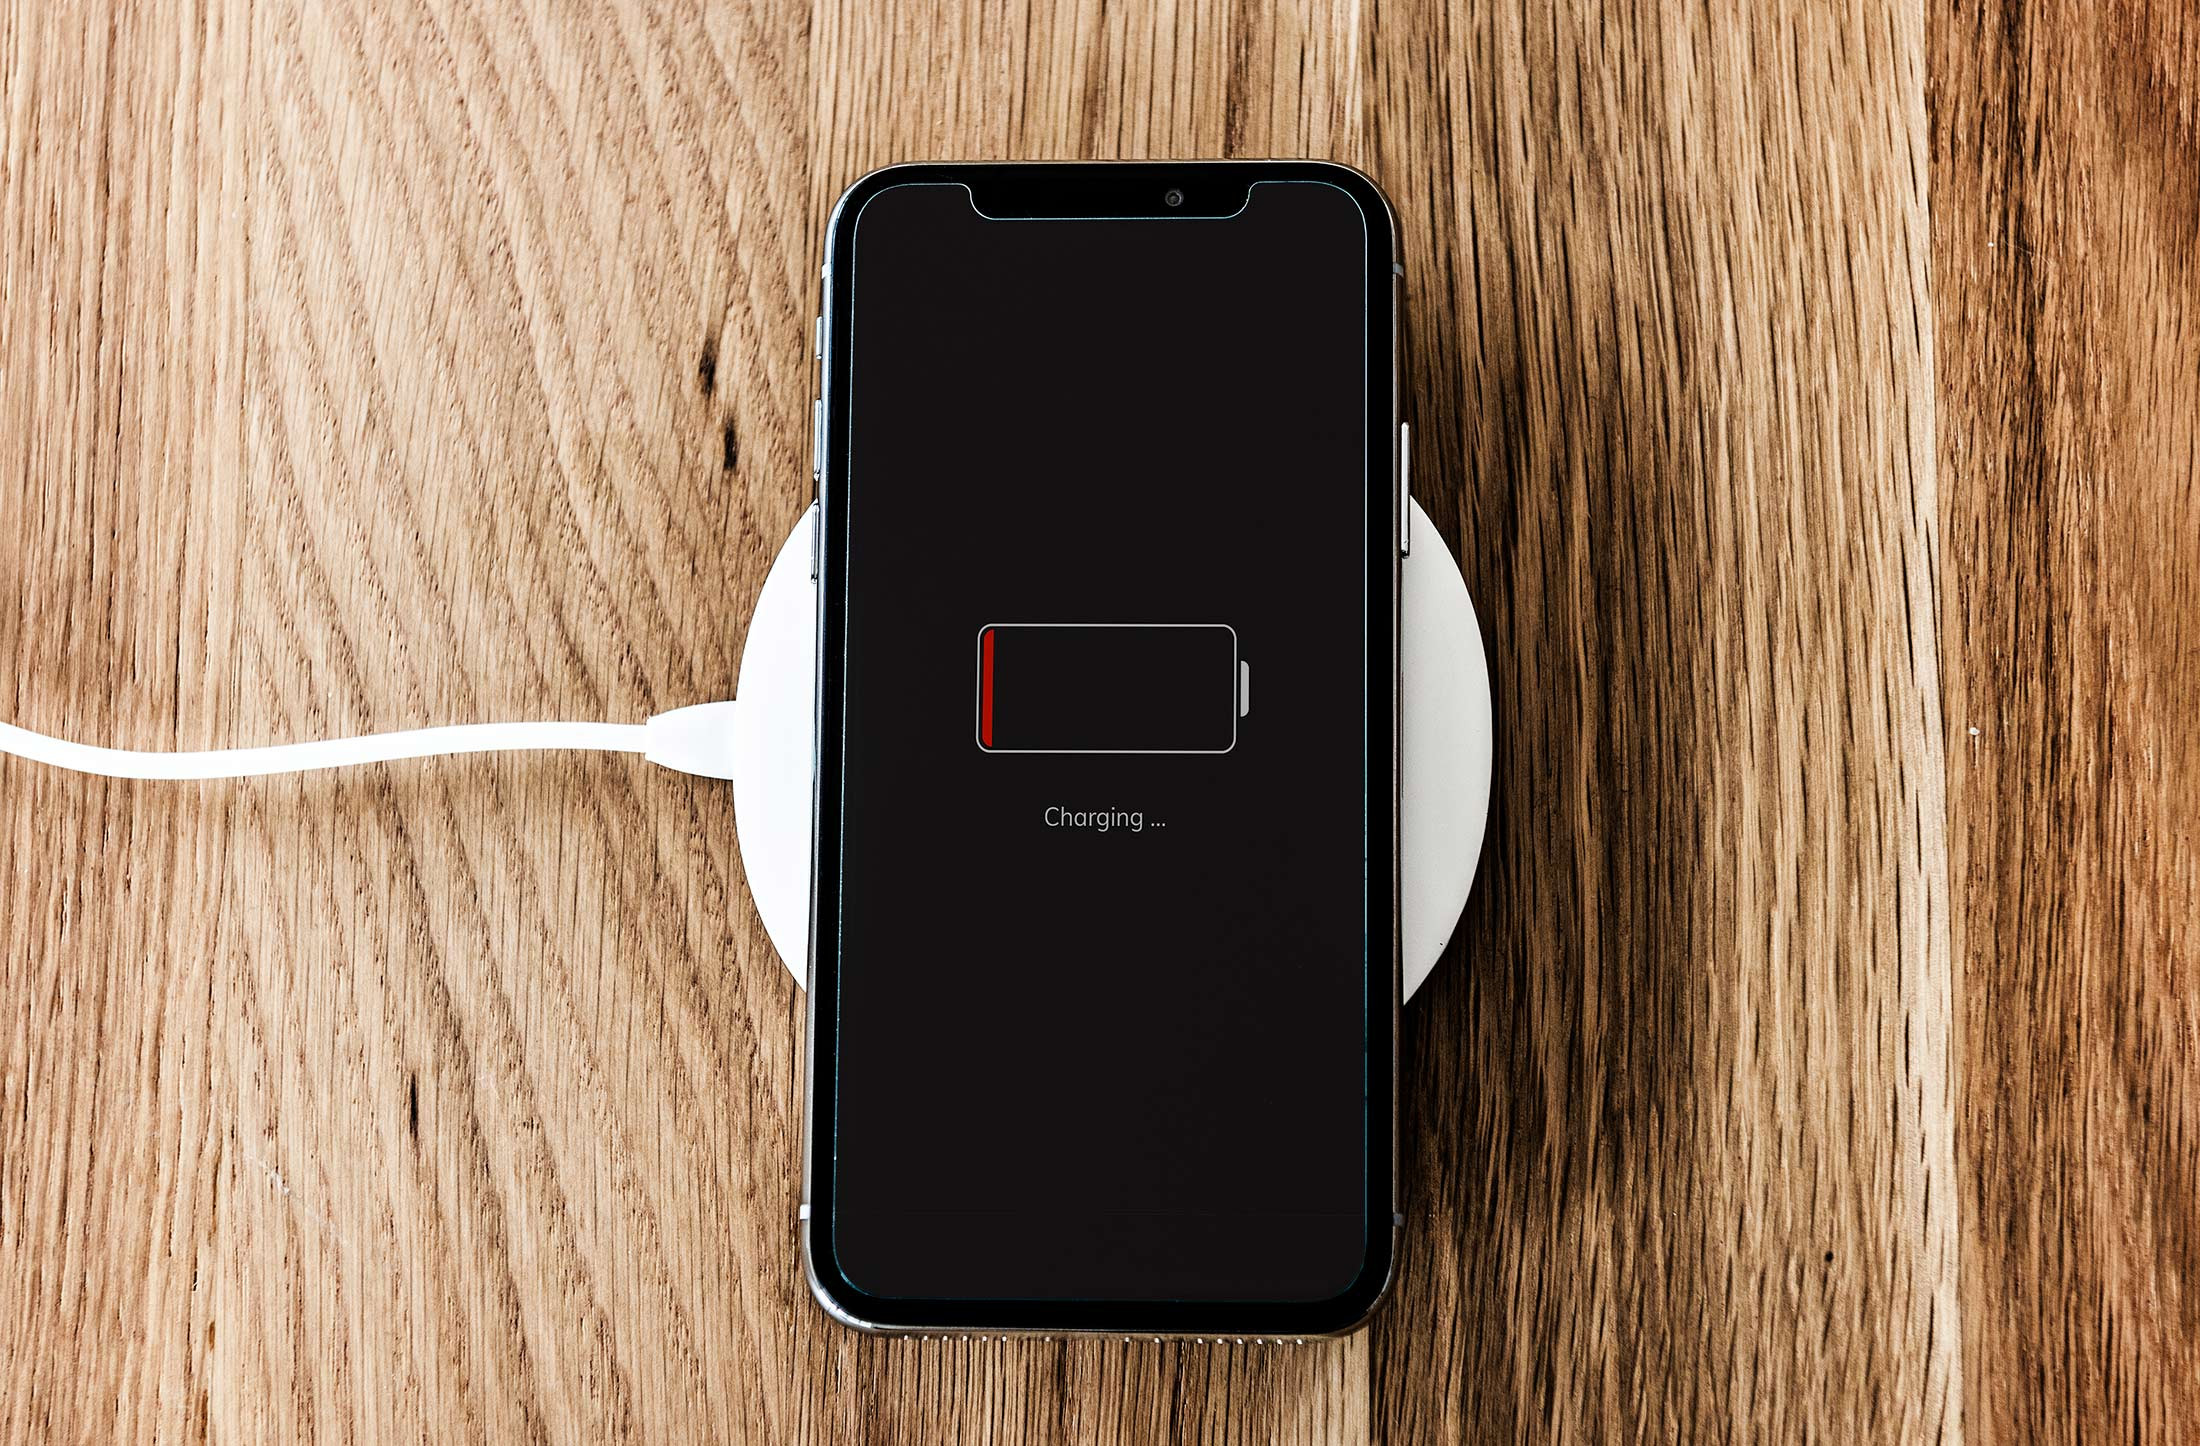 How to make my mobile battery charge faster?